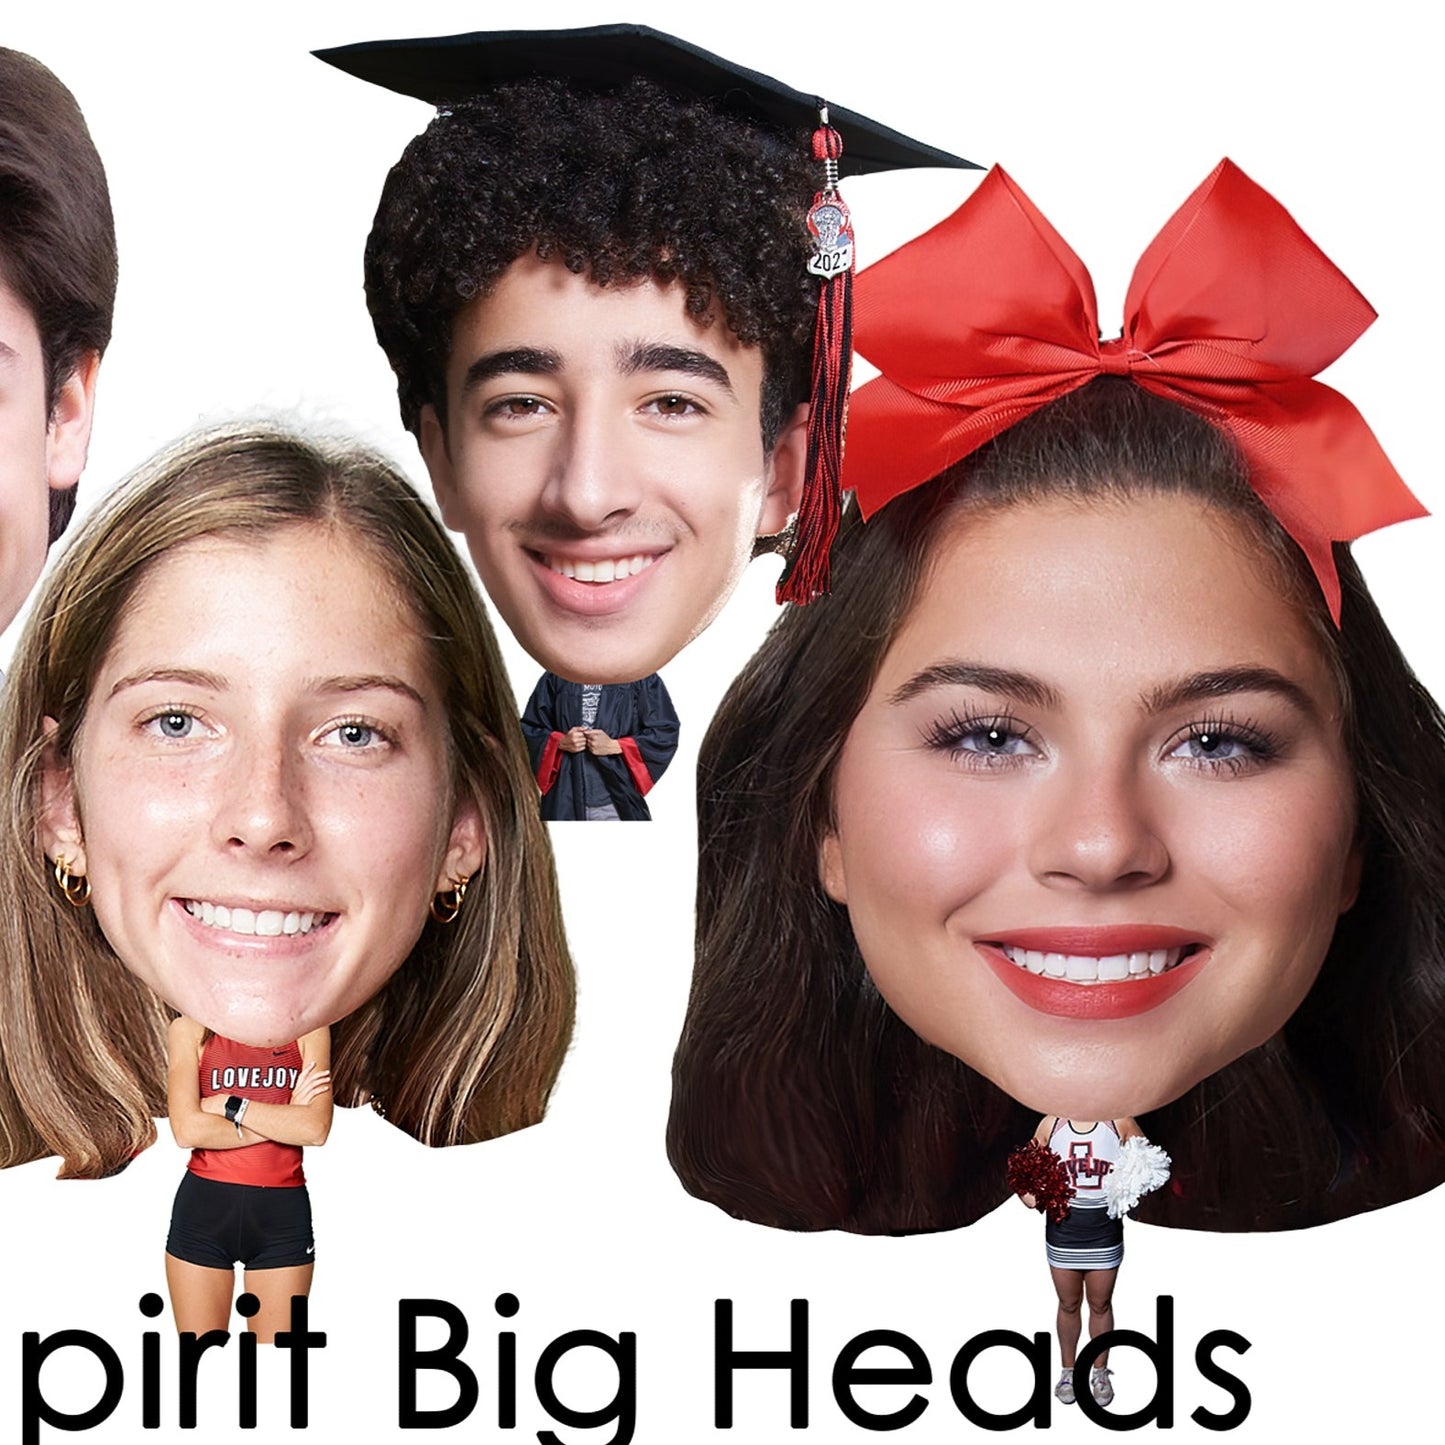 Big Heads Signs and Files